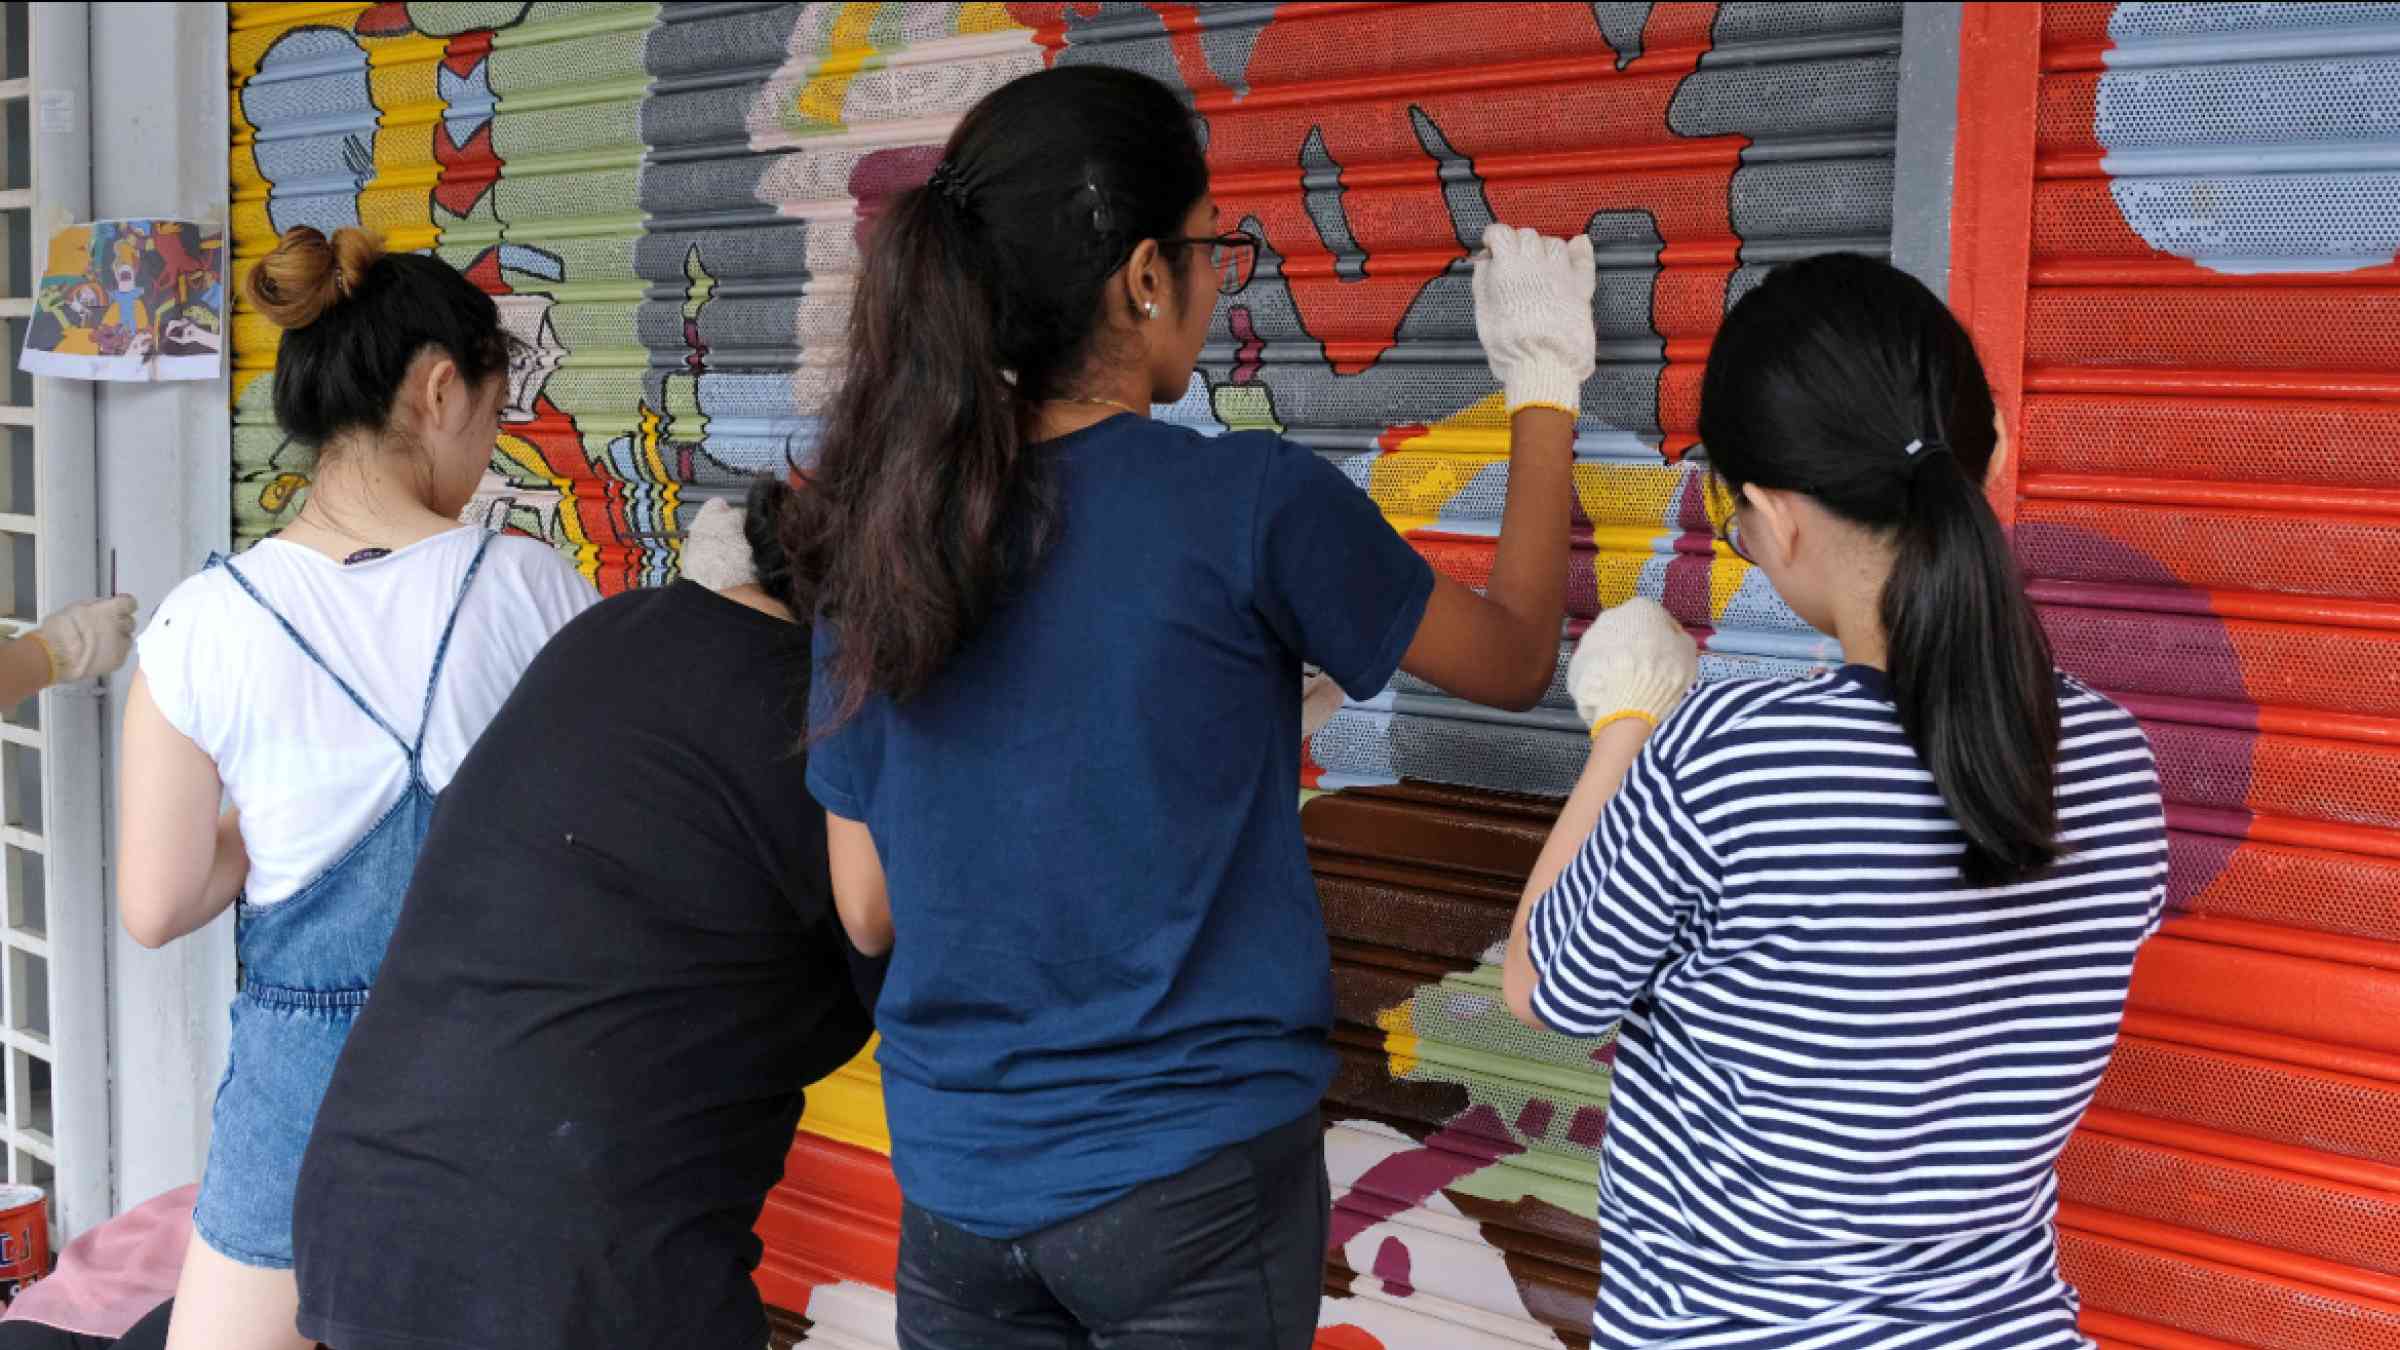 Street art takes shape as a volunteer group of young girls work together painting